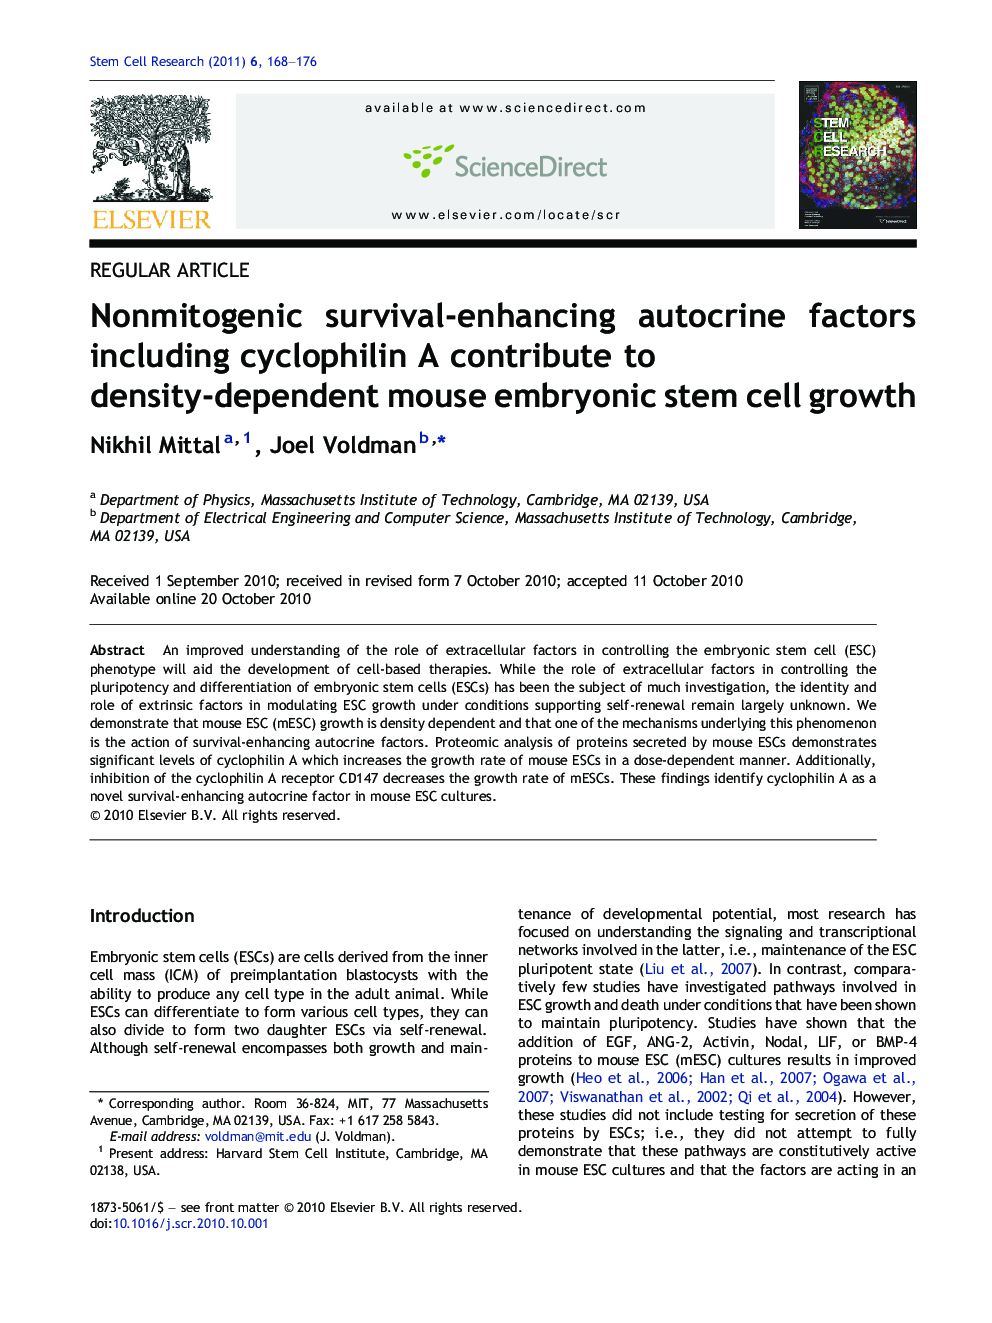 Nonmitogenic survival-enhancing autocrine factors including cyclophilin A contribute to density-dependent mouse embryonic stem cell growth